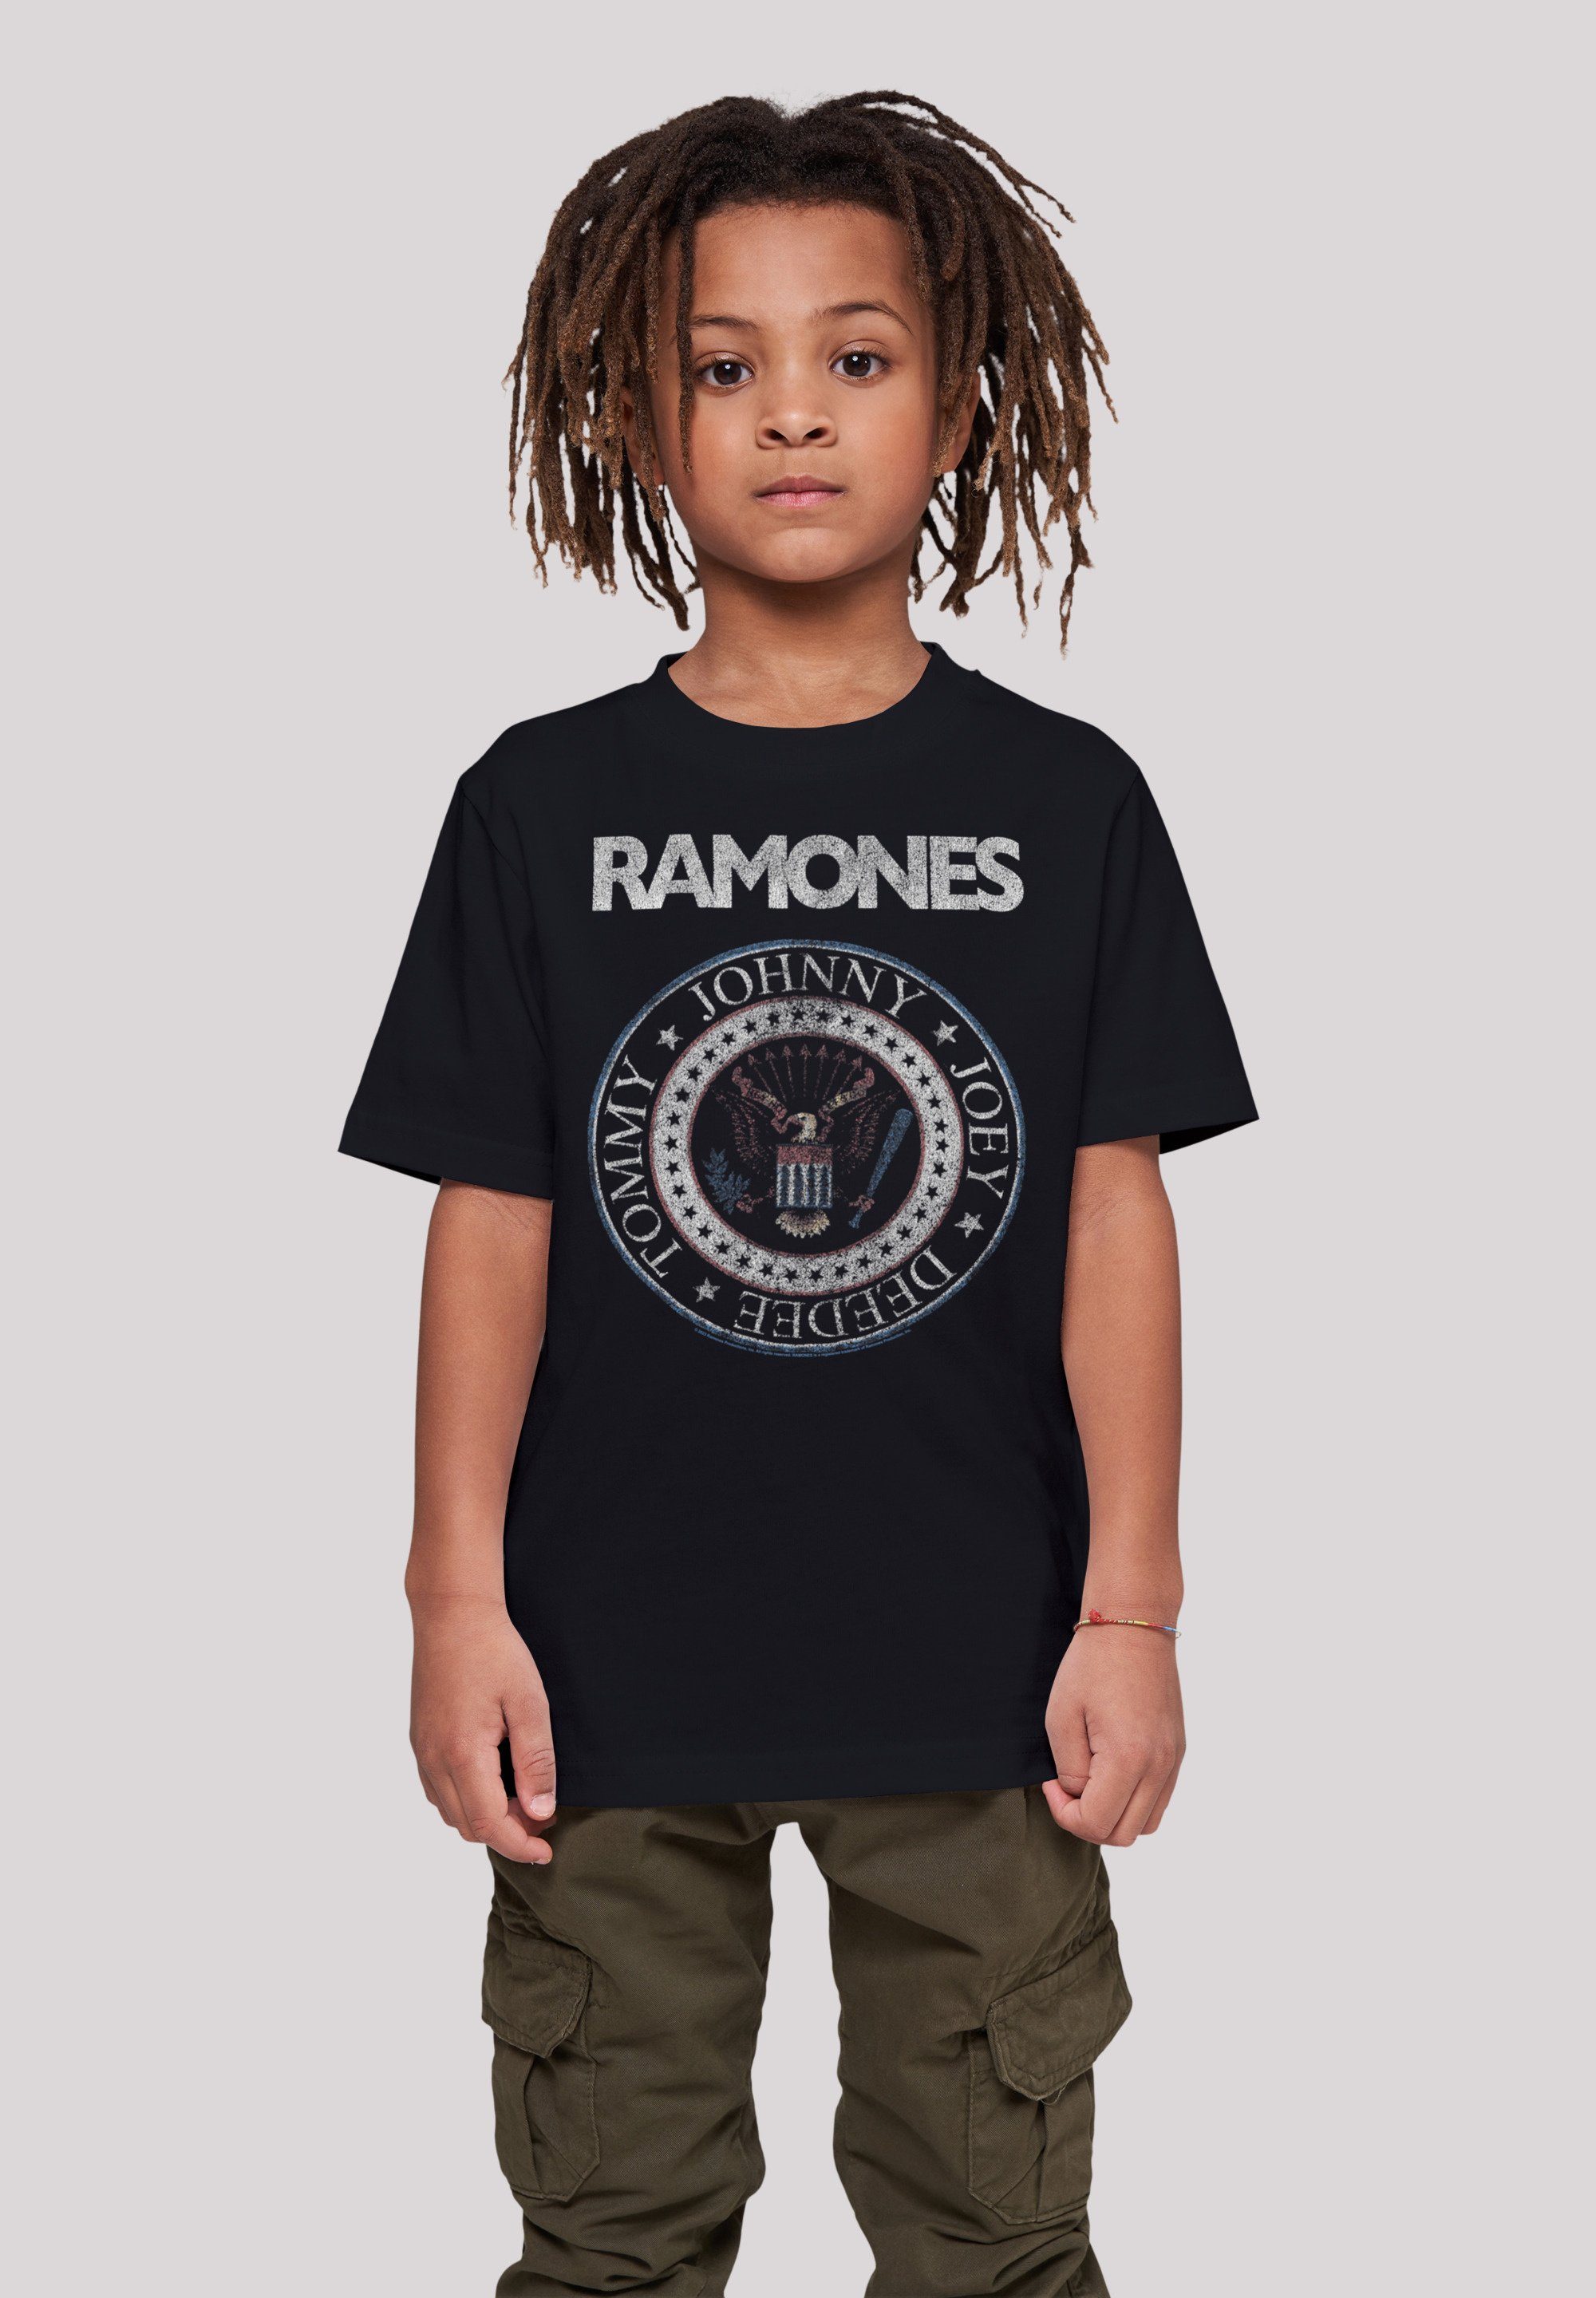 F4NT4STIC T-Shirt Ramones Musik Rock Premium White Red Qualität, And Band Seal Band, Rock-Musik